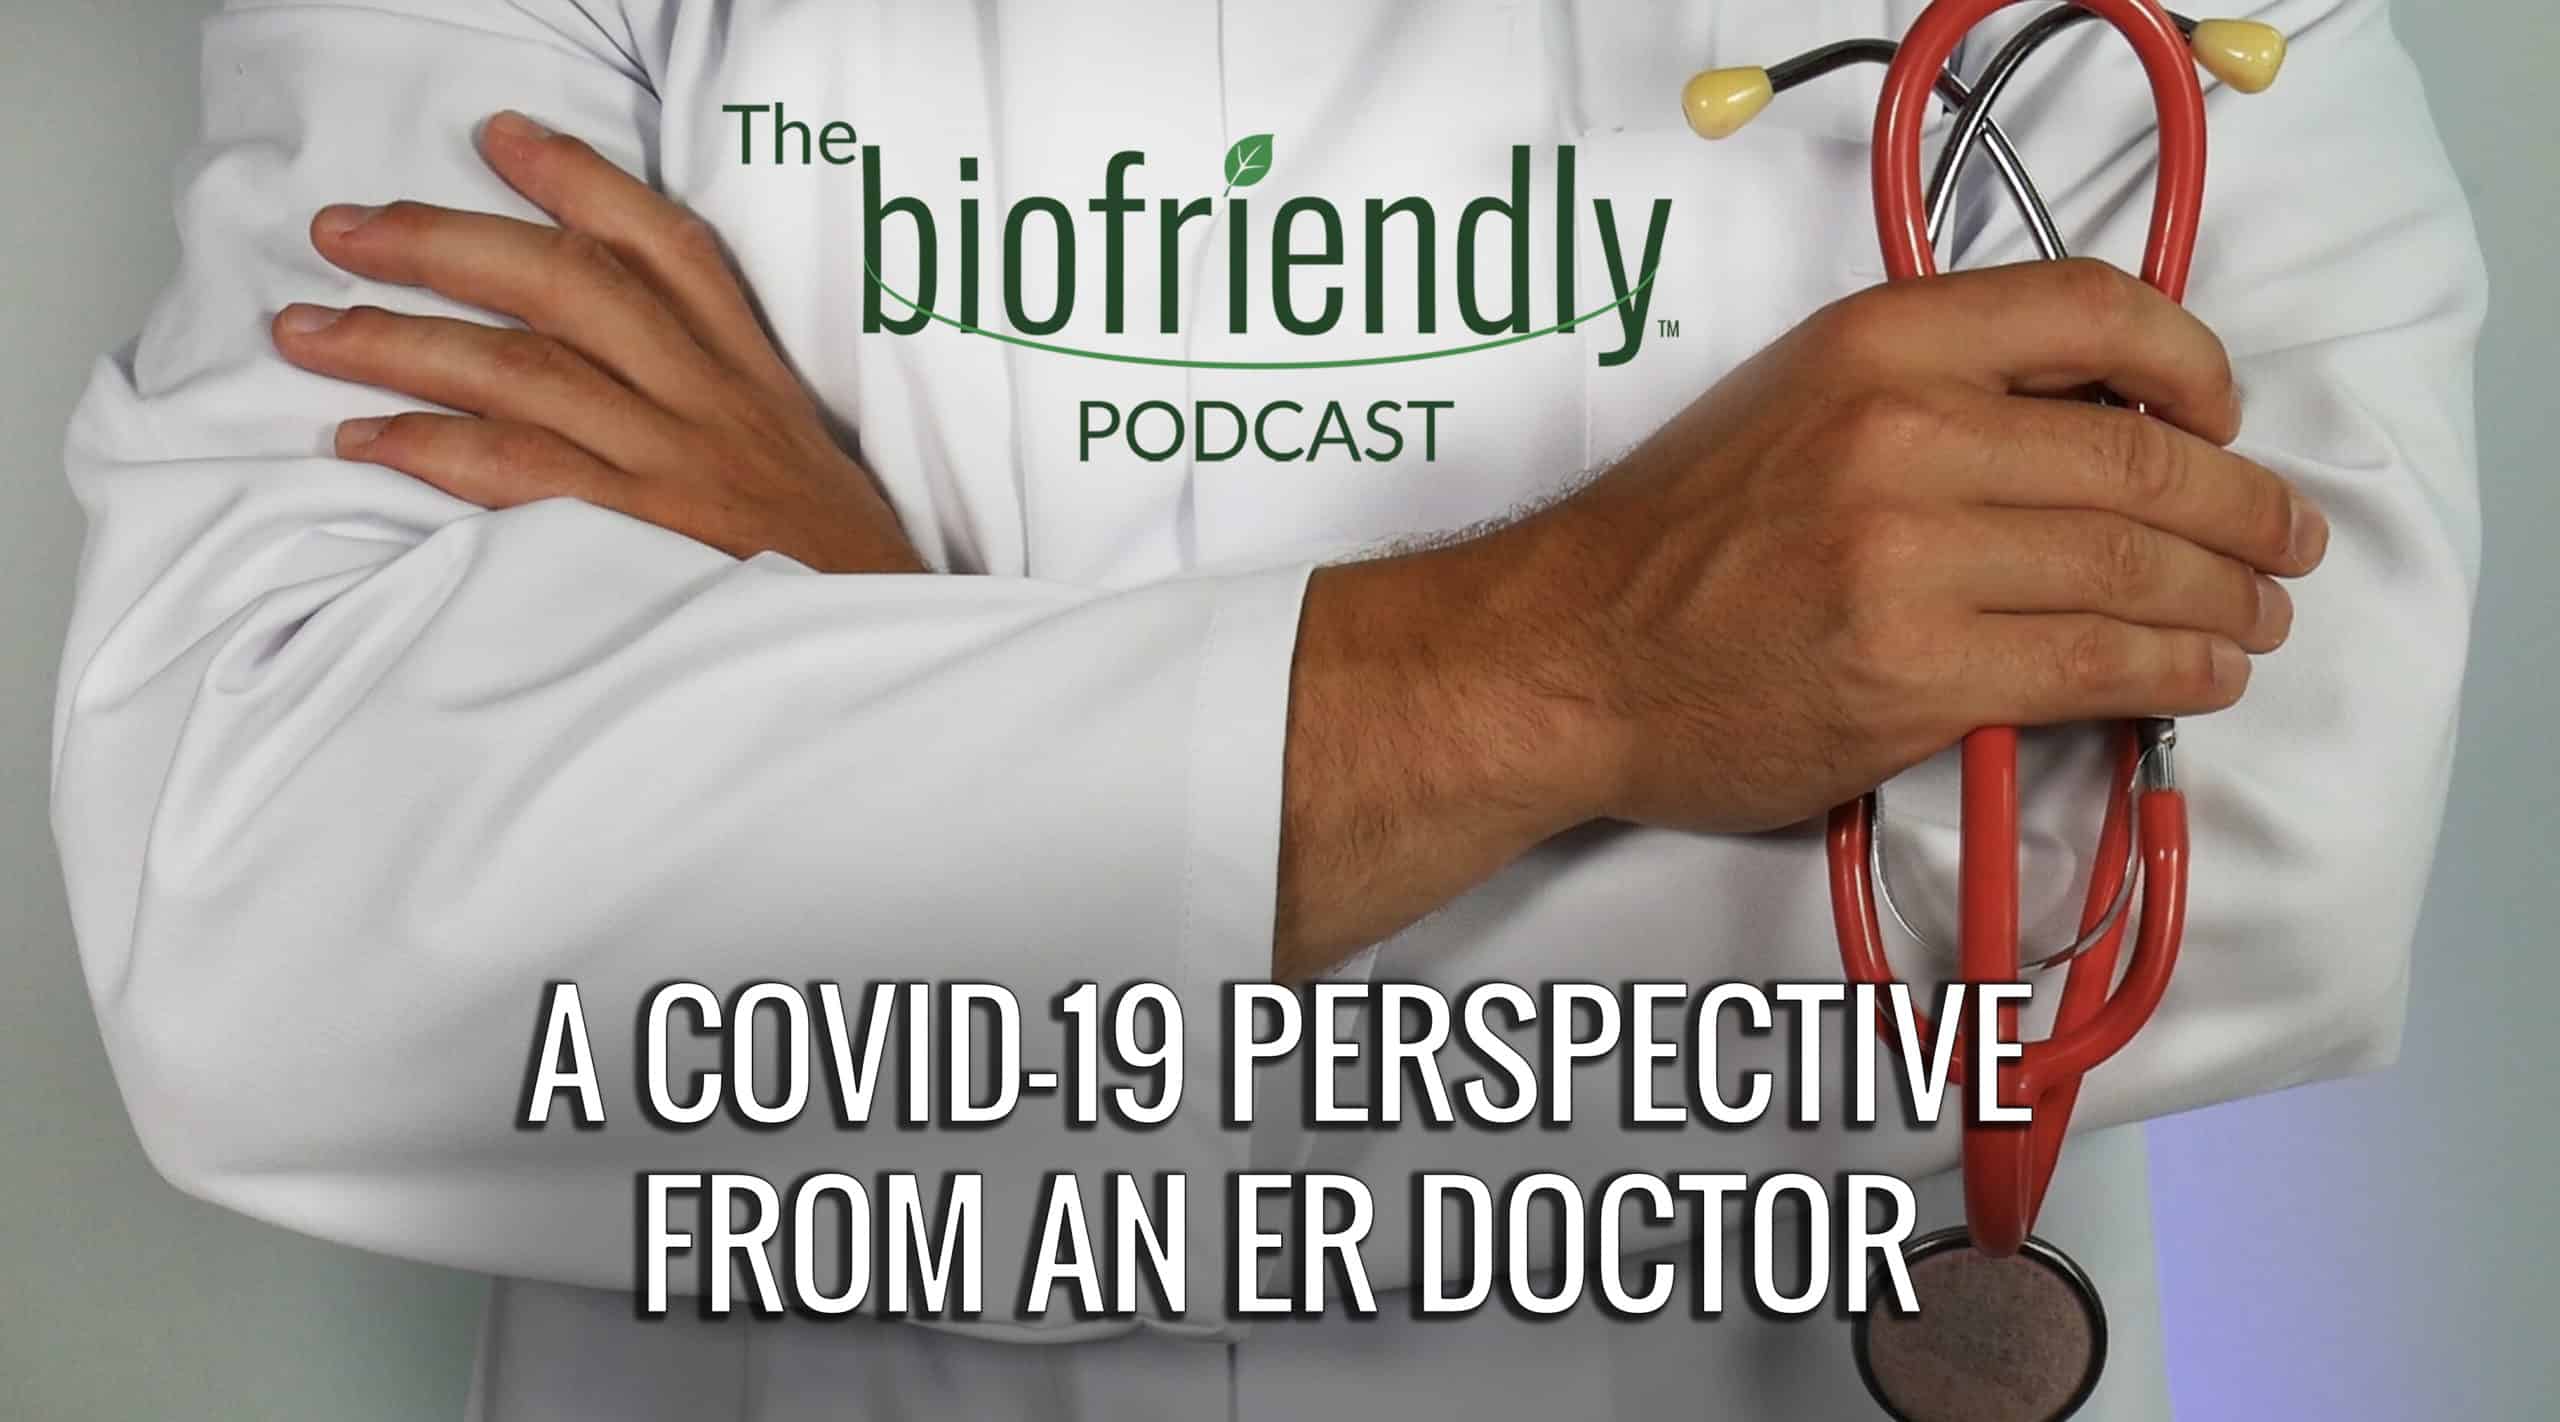 The Biofriendly Podcast - Episode 63 - A COVID-19 Perspective from an ER Doctor